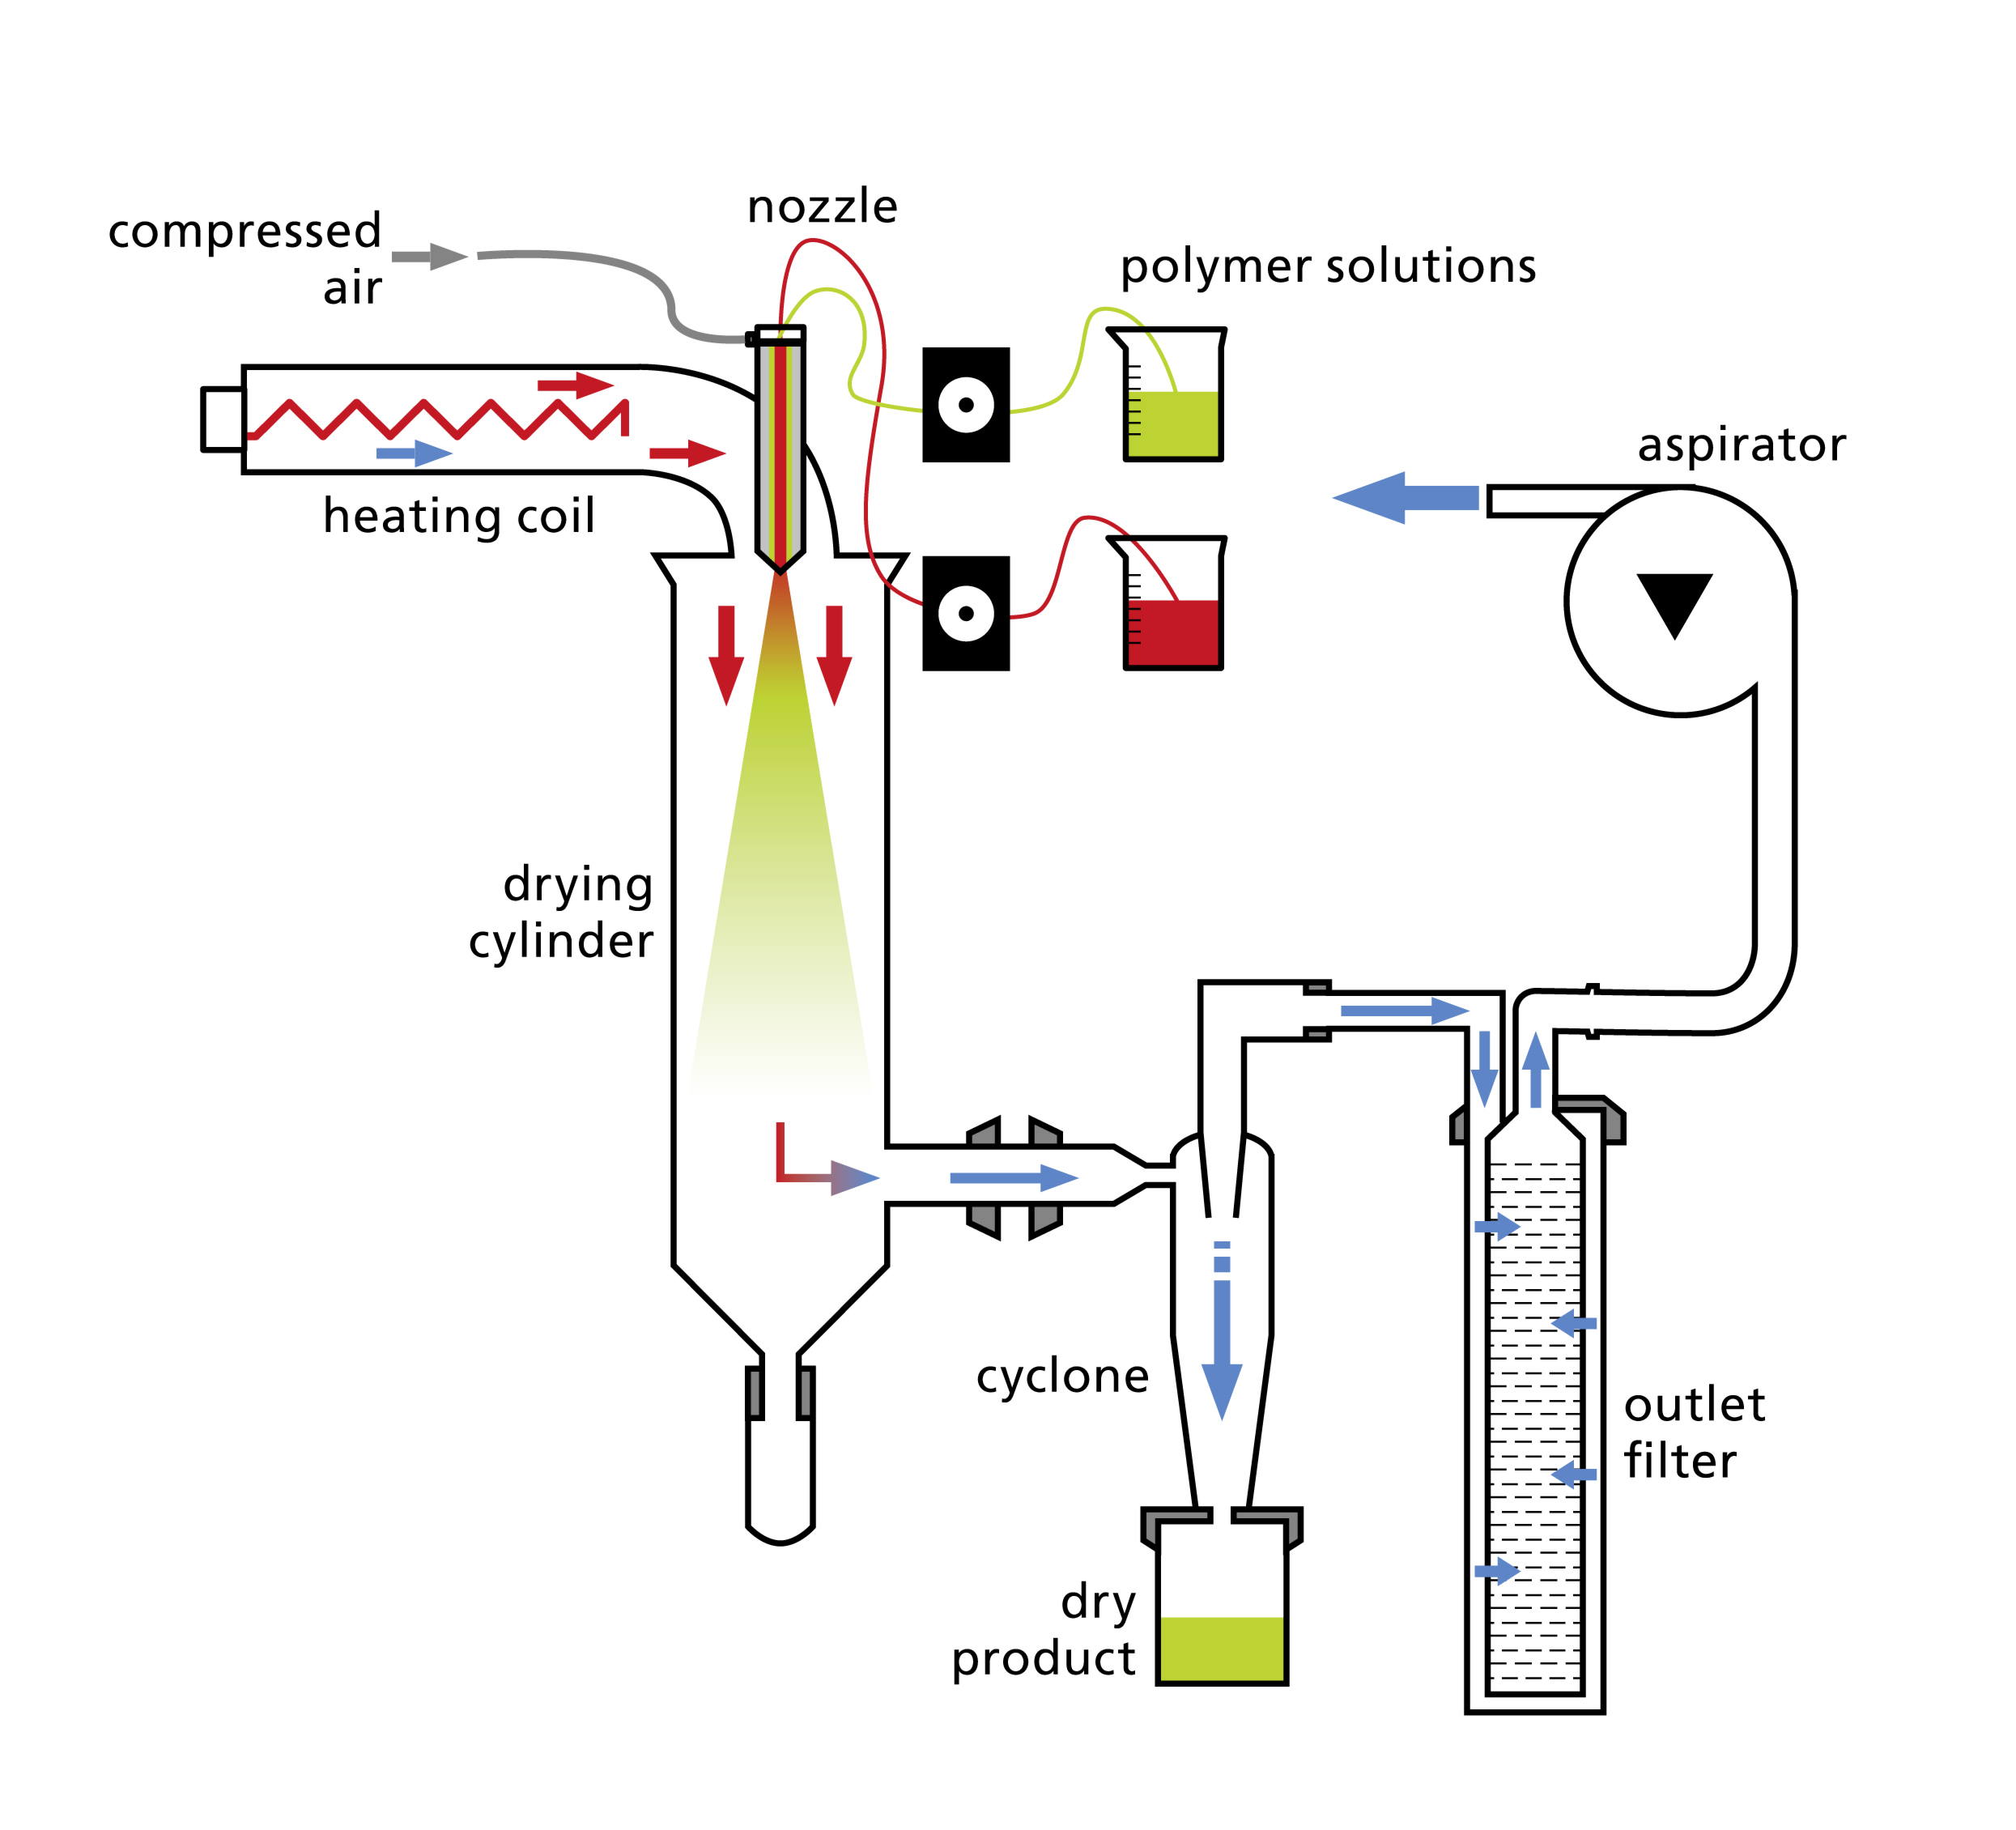 Schematic diagram of the spray-drying process